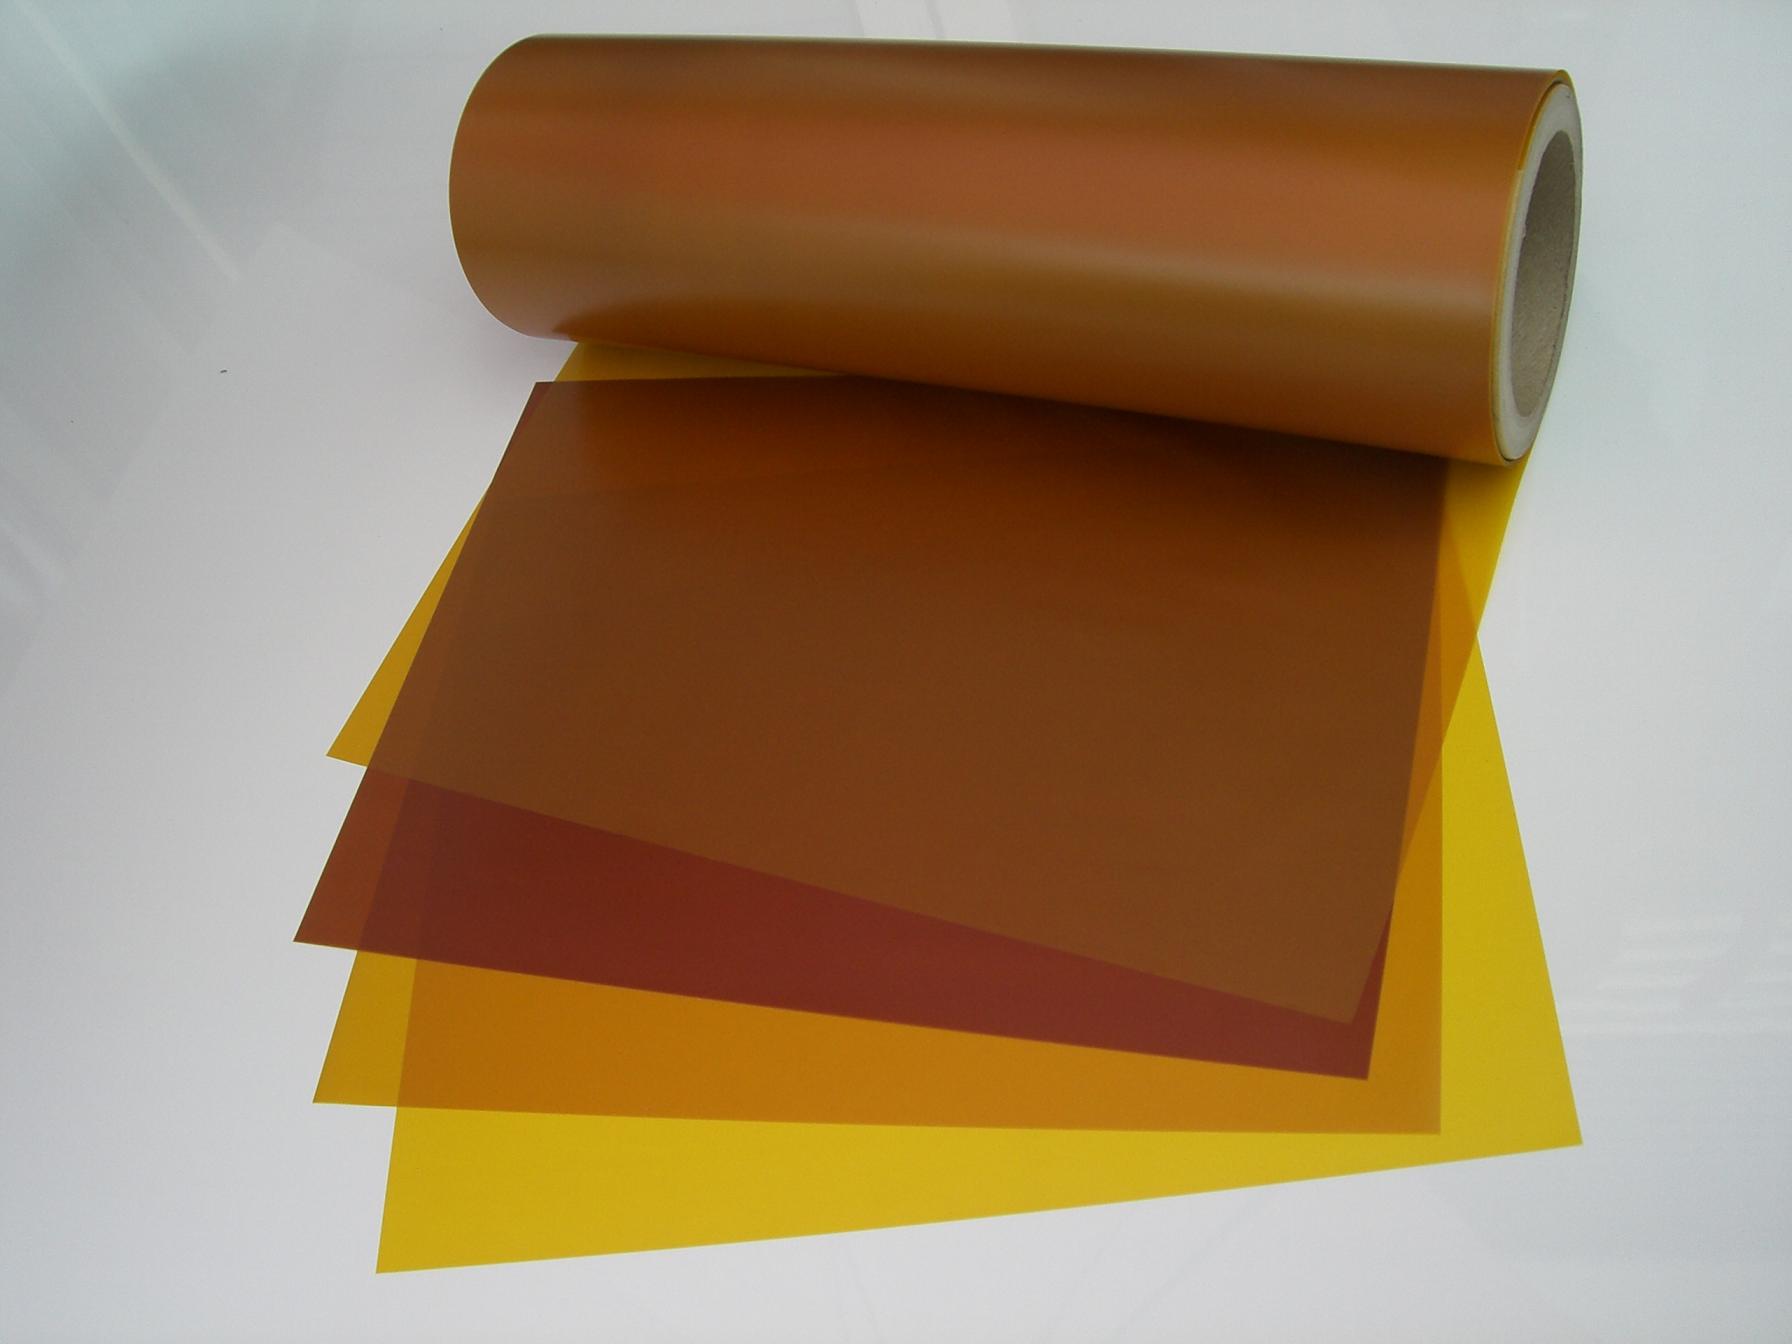 2 Mil (.002" thick) General-Purpose Polyimide Film HN 180°C, amber, custom rolls and sheets based on your specification